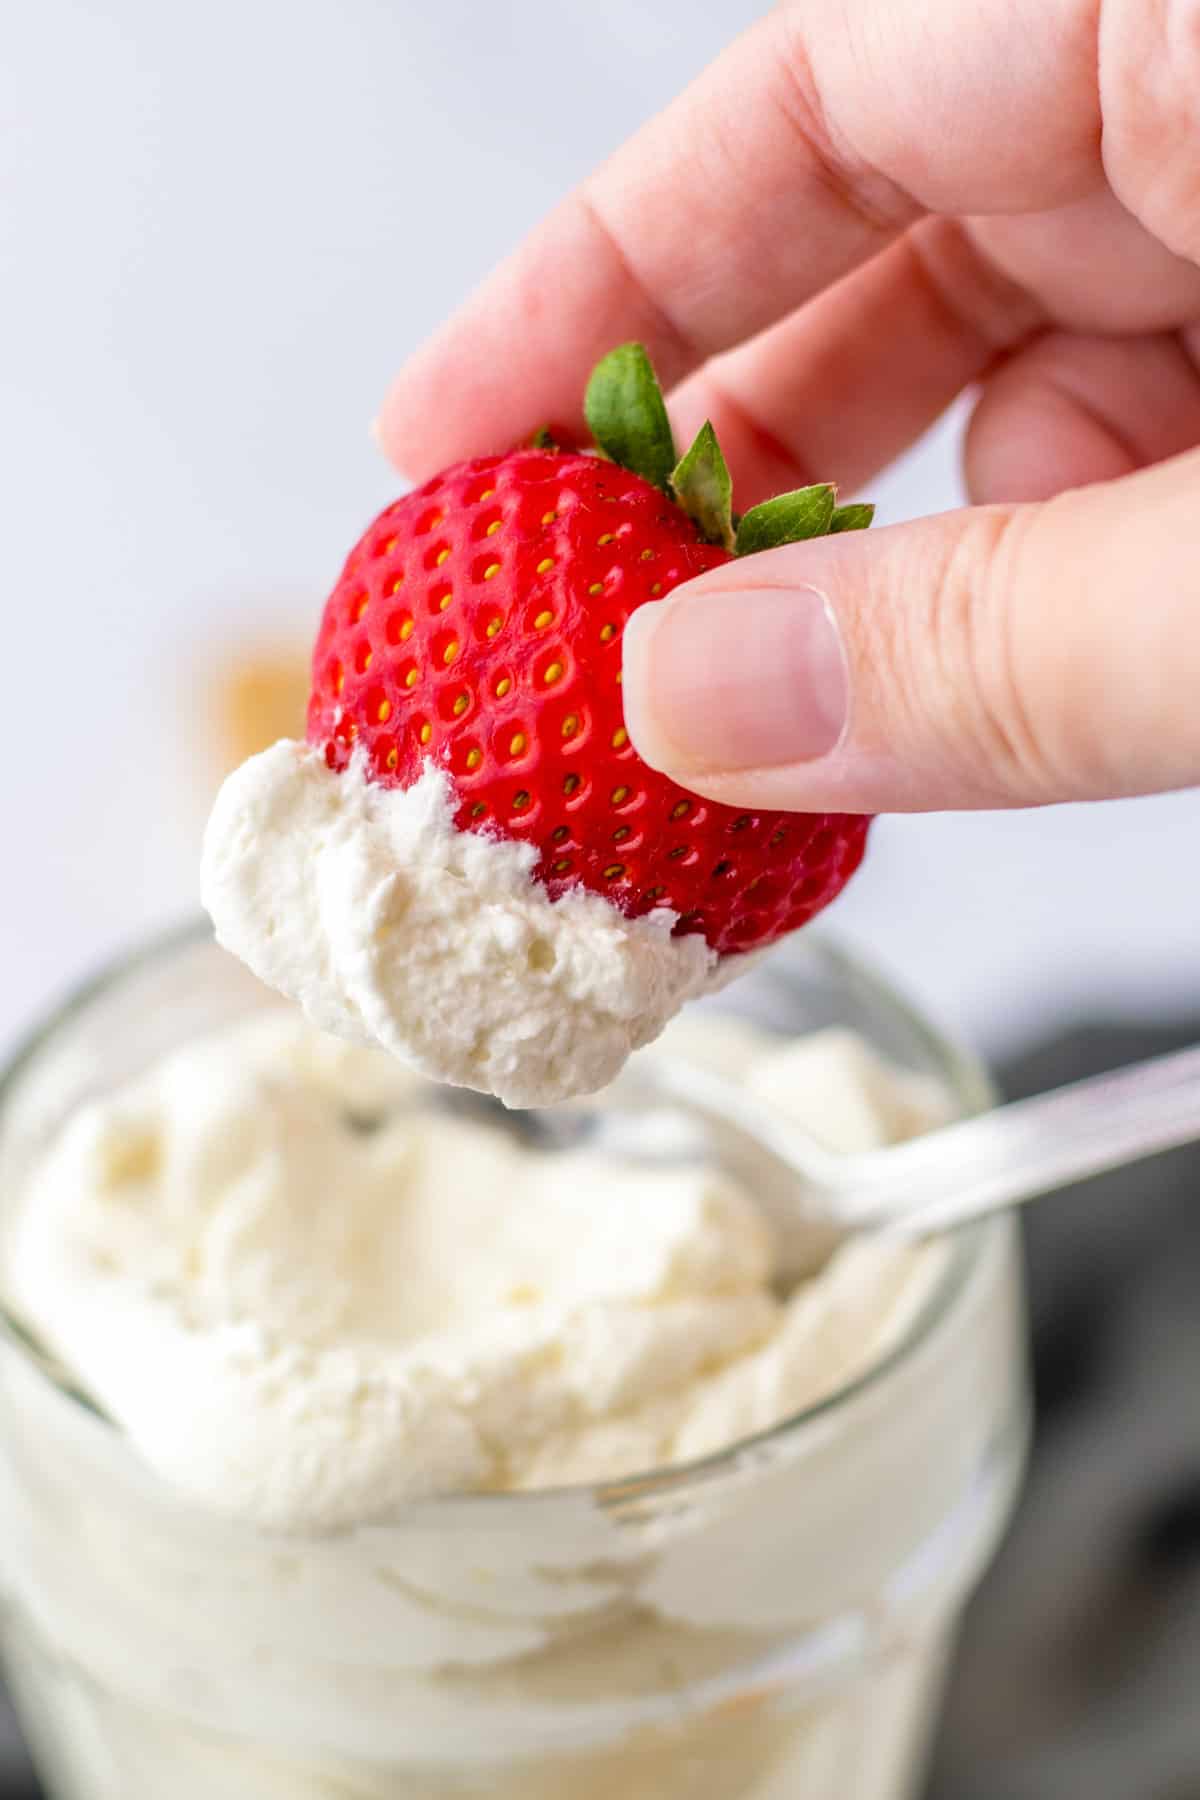 Light and fluffy homemade cool whip whipped topping on a fresh strawbery.